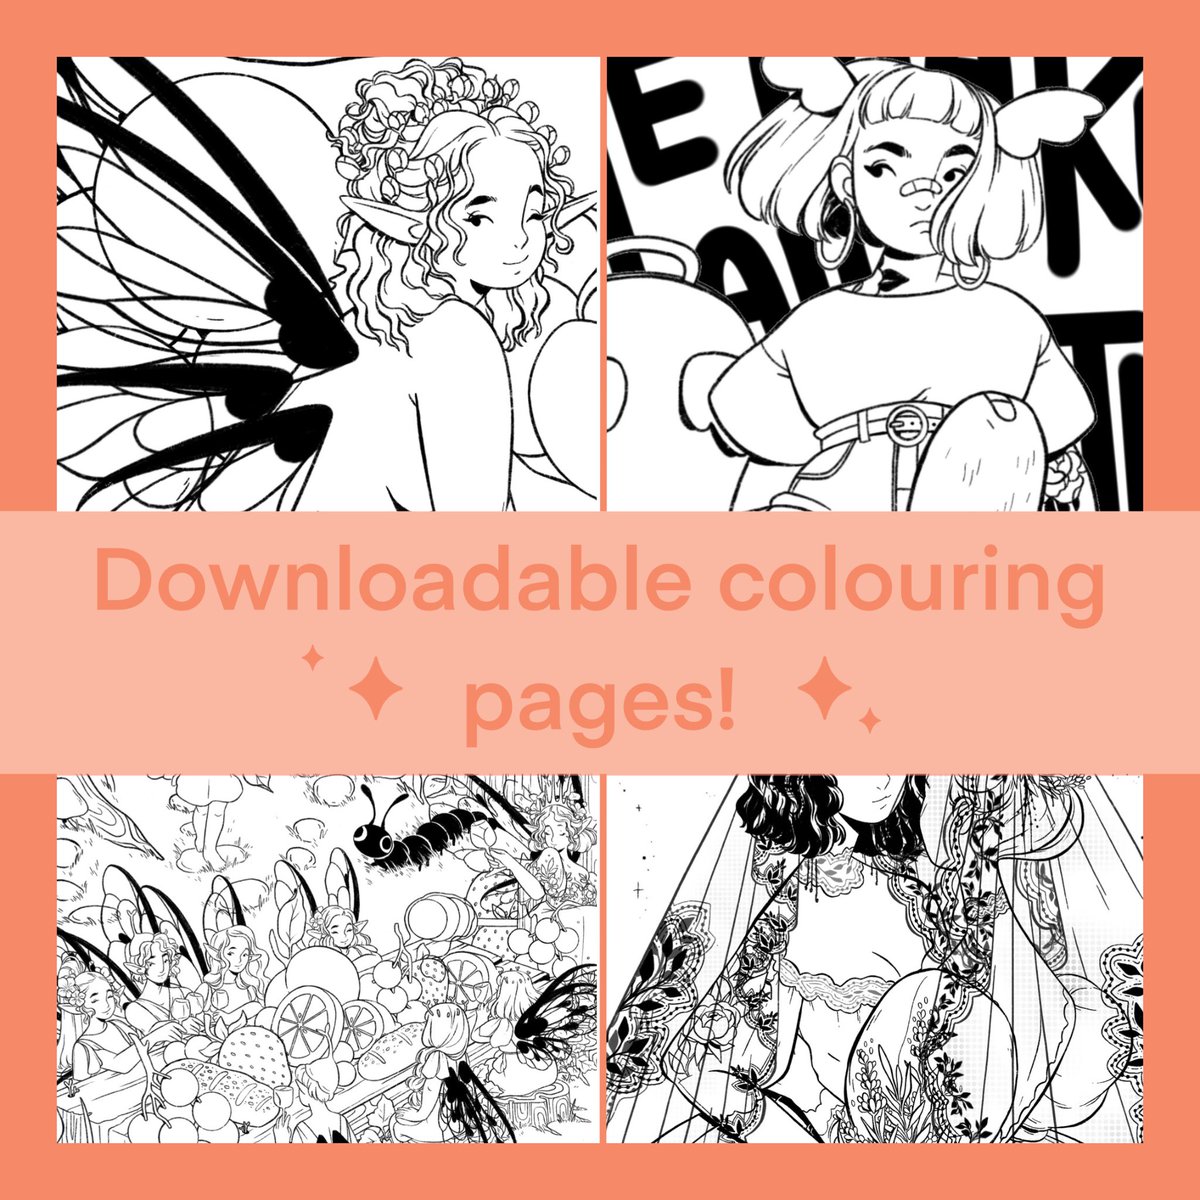 I've got some colouring pages on gumroad! 
Click the link to check em out !
https://t.co/5YIrQDUn7k 